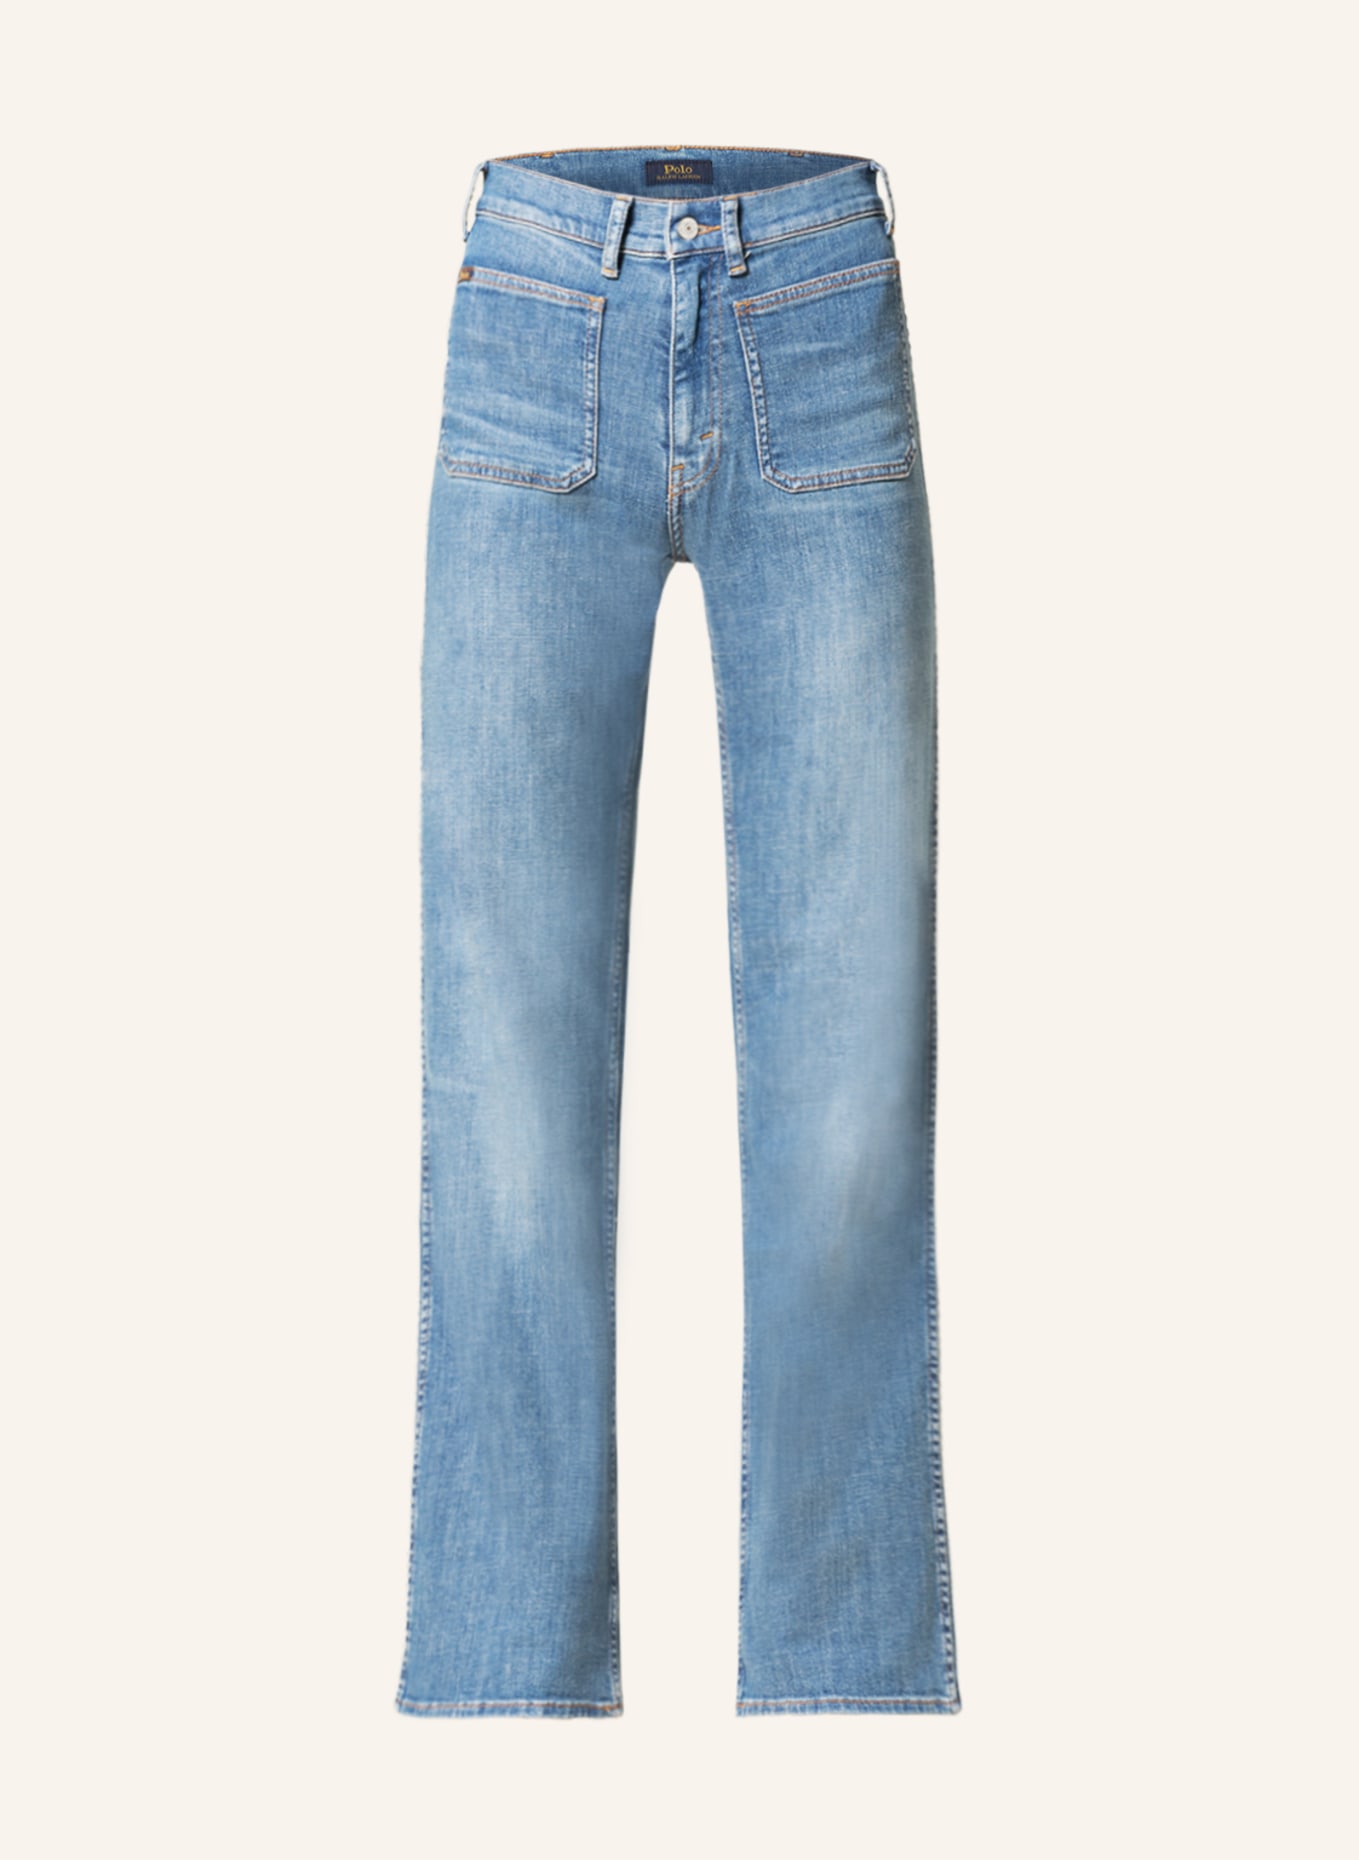 POLO RALPH LAUREN Bootcut Jeans THE BOOT, Farbe: 001 HOWES WASH (Bild 1)